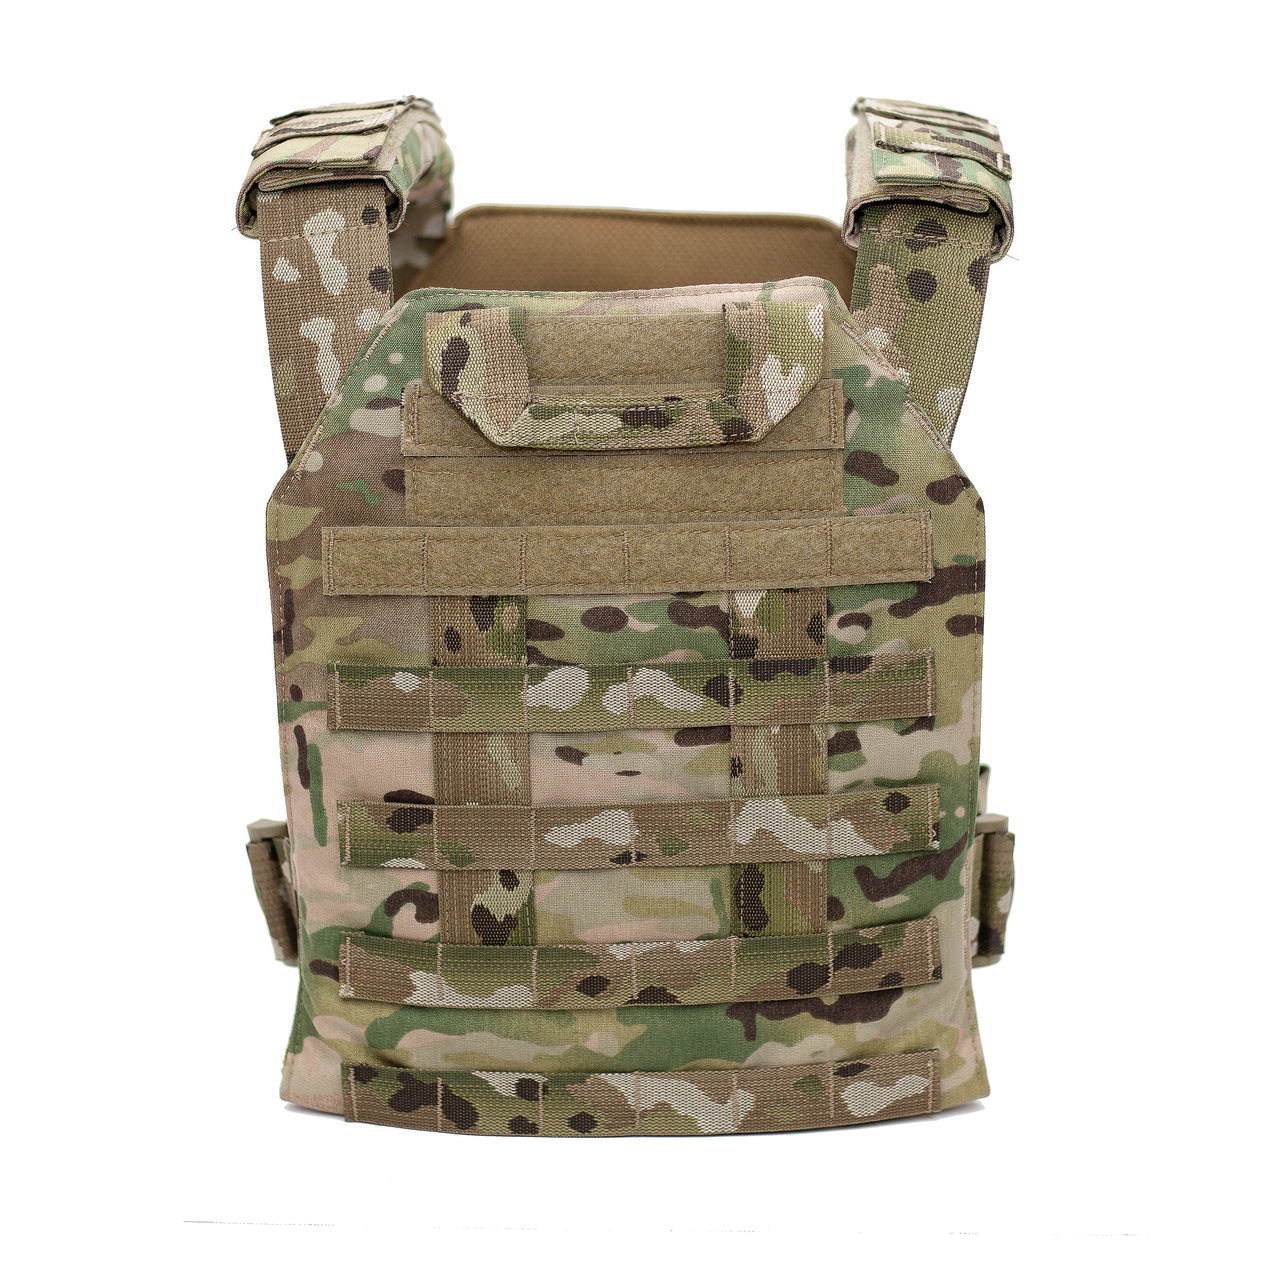 A Predator Armor Minuteman Plate Carrier on a white background.